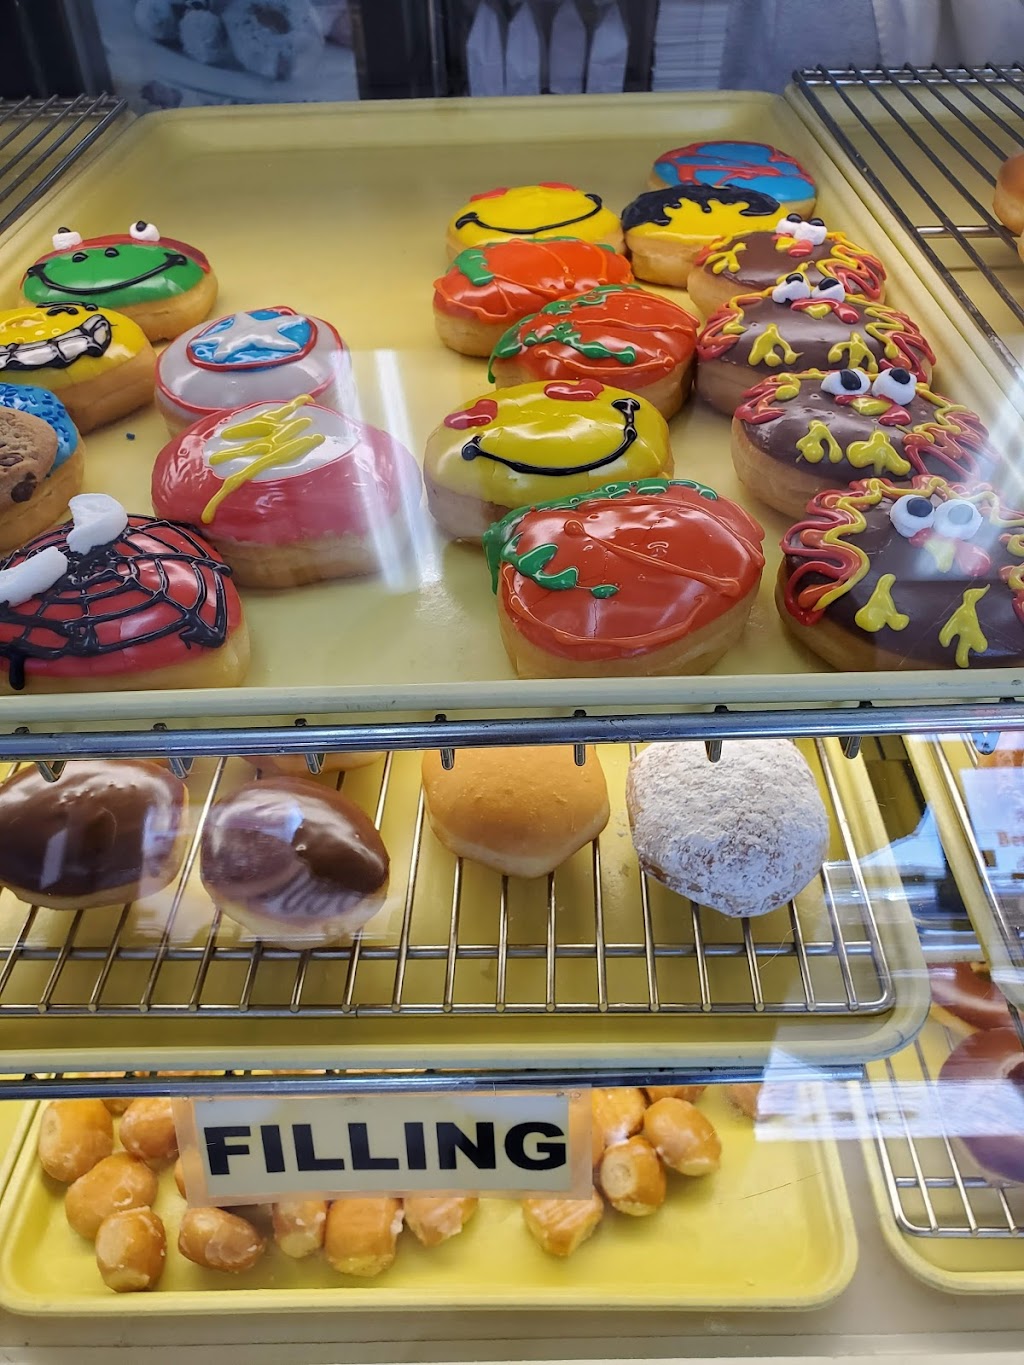 Best Donuts | 4301 SE 15th St Suite A, Del City, OK 73115, USA | Phone: (405) 605-2499